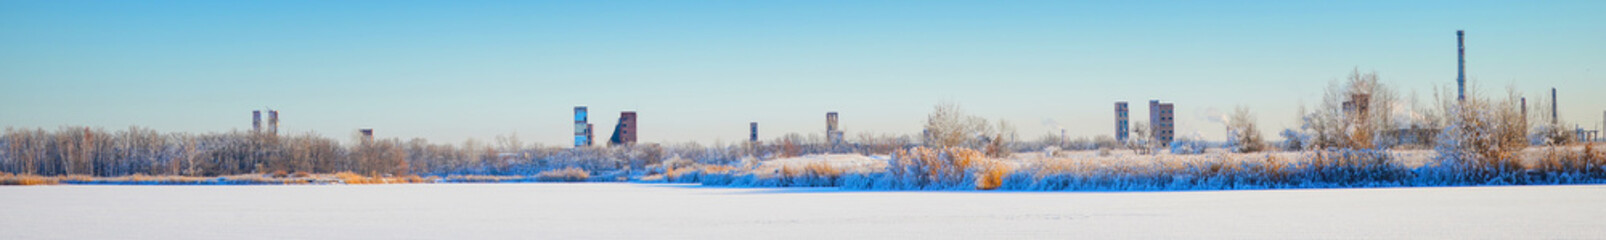 An abandoned old chemical plant on the bank of a frozen winter river covered with snow. Industrial...